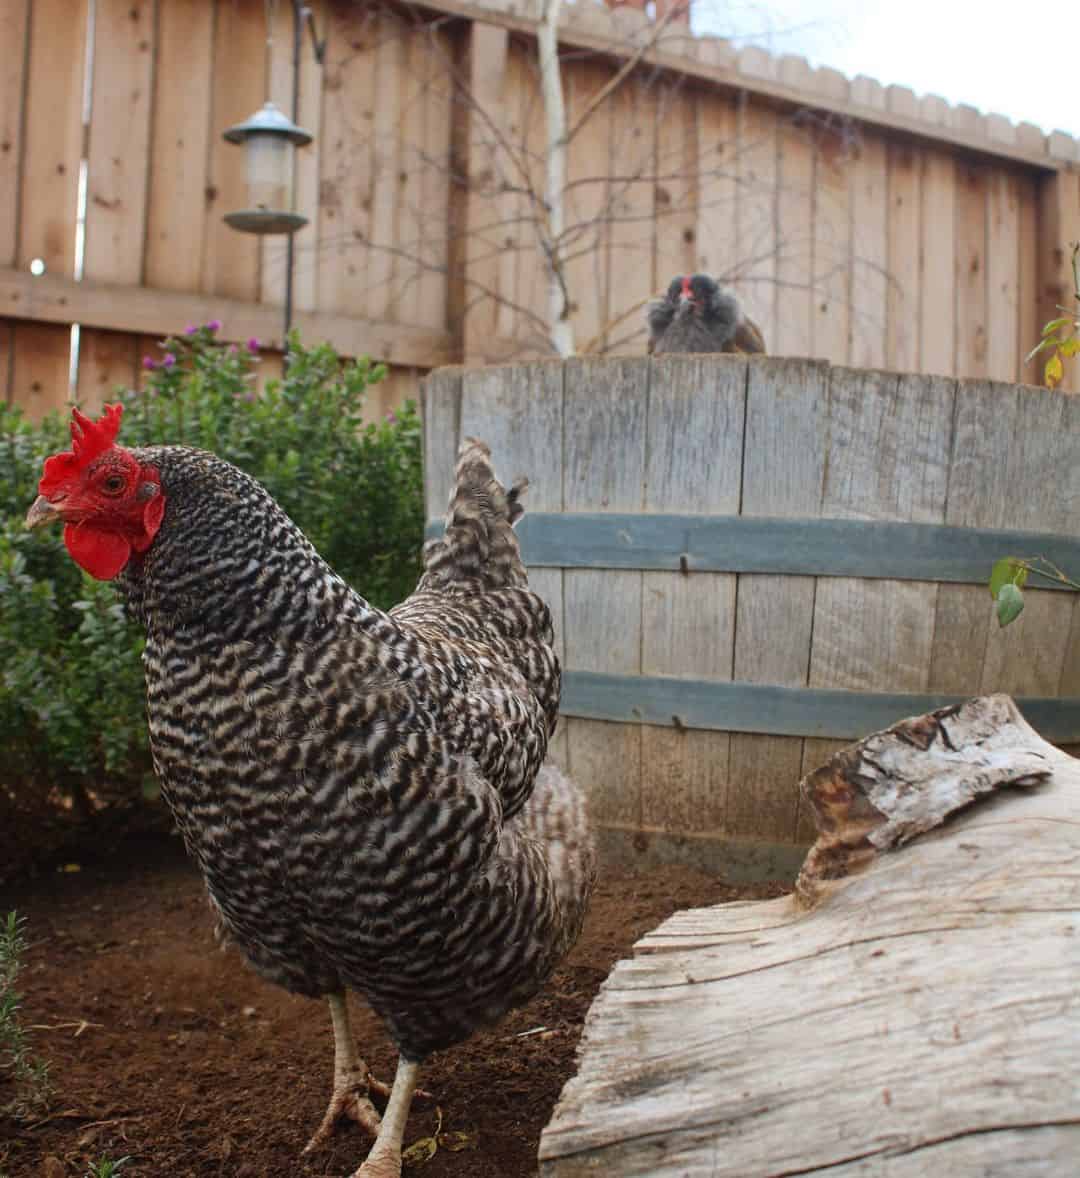 Barred Rock Chickens